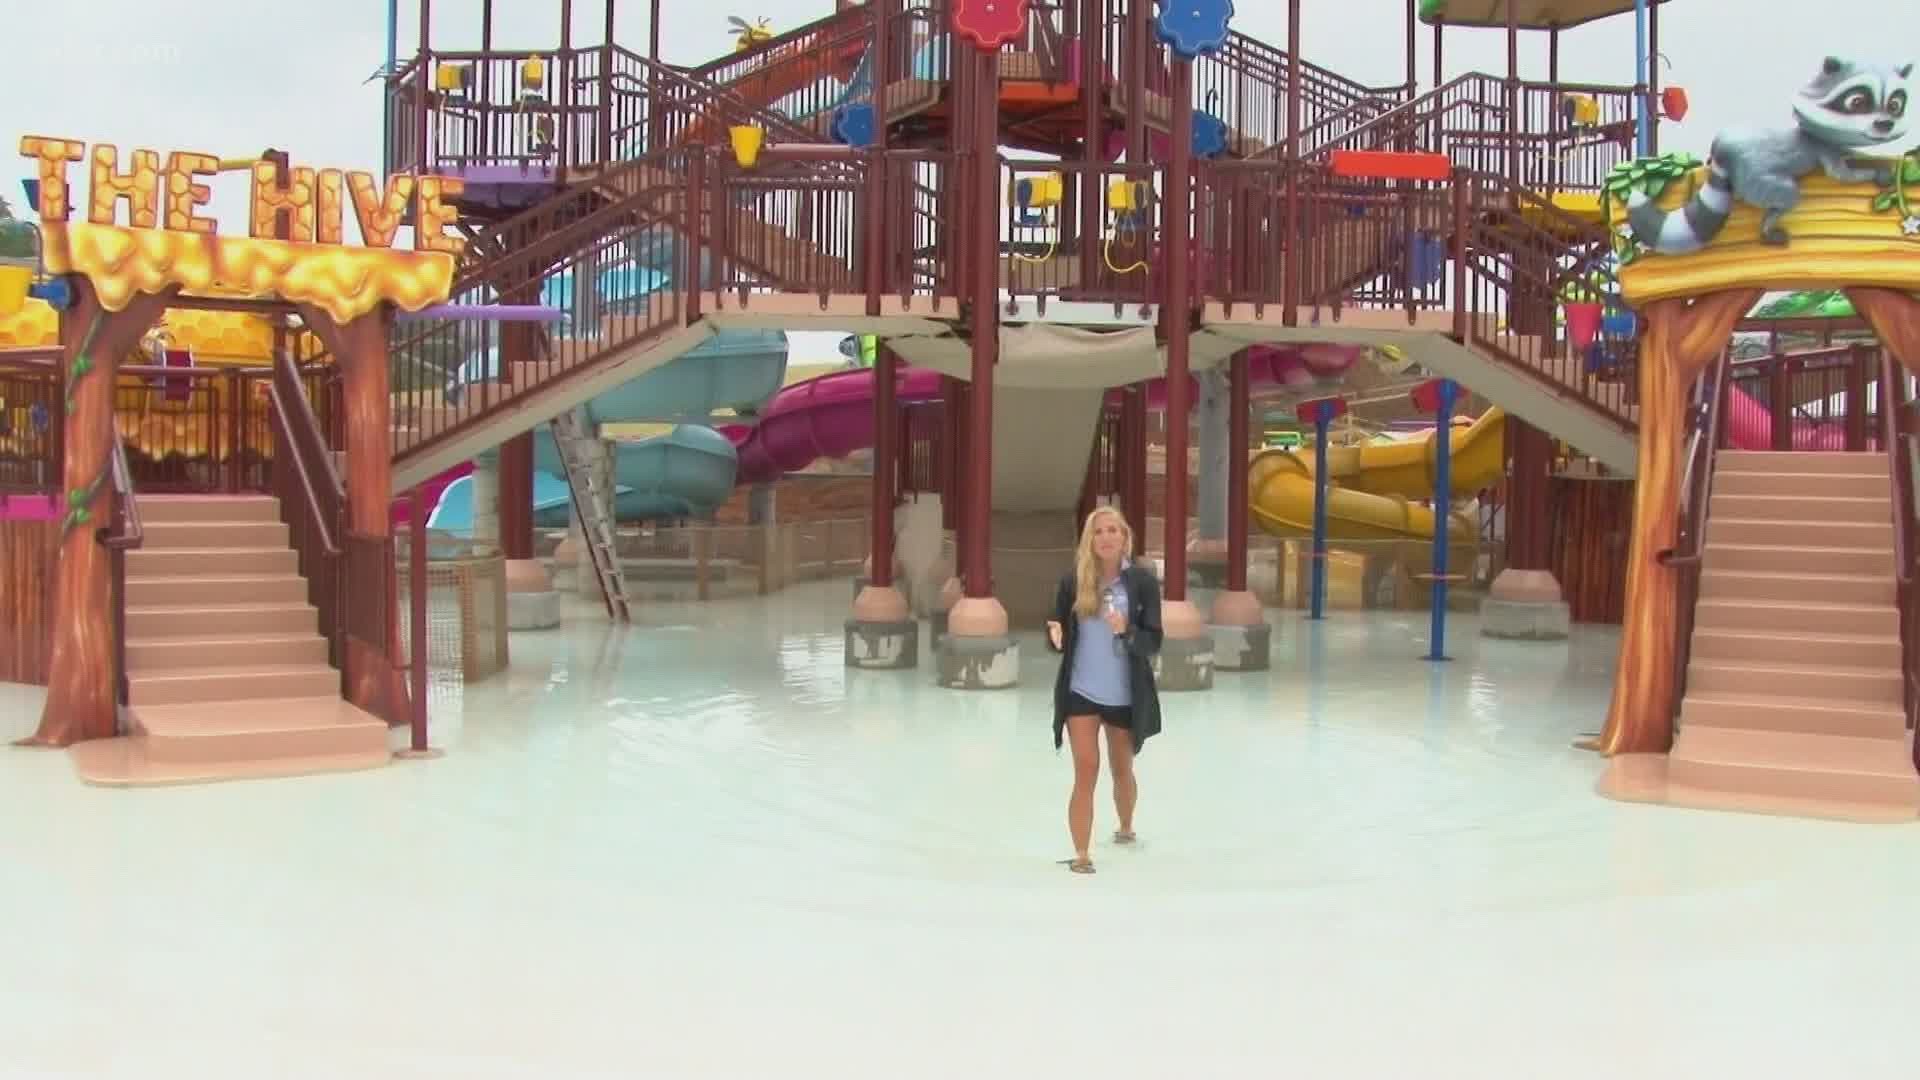 Here's more of a sneak peek inside Soaky Mountain before it opens this weekend!